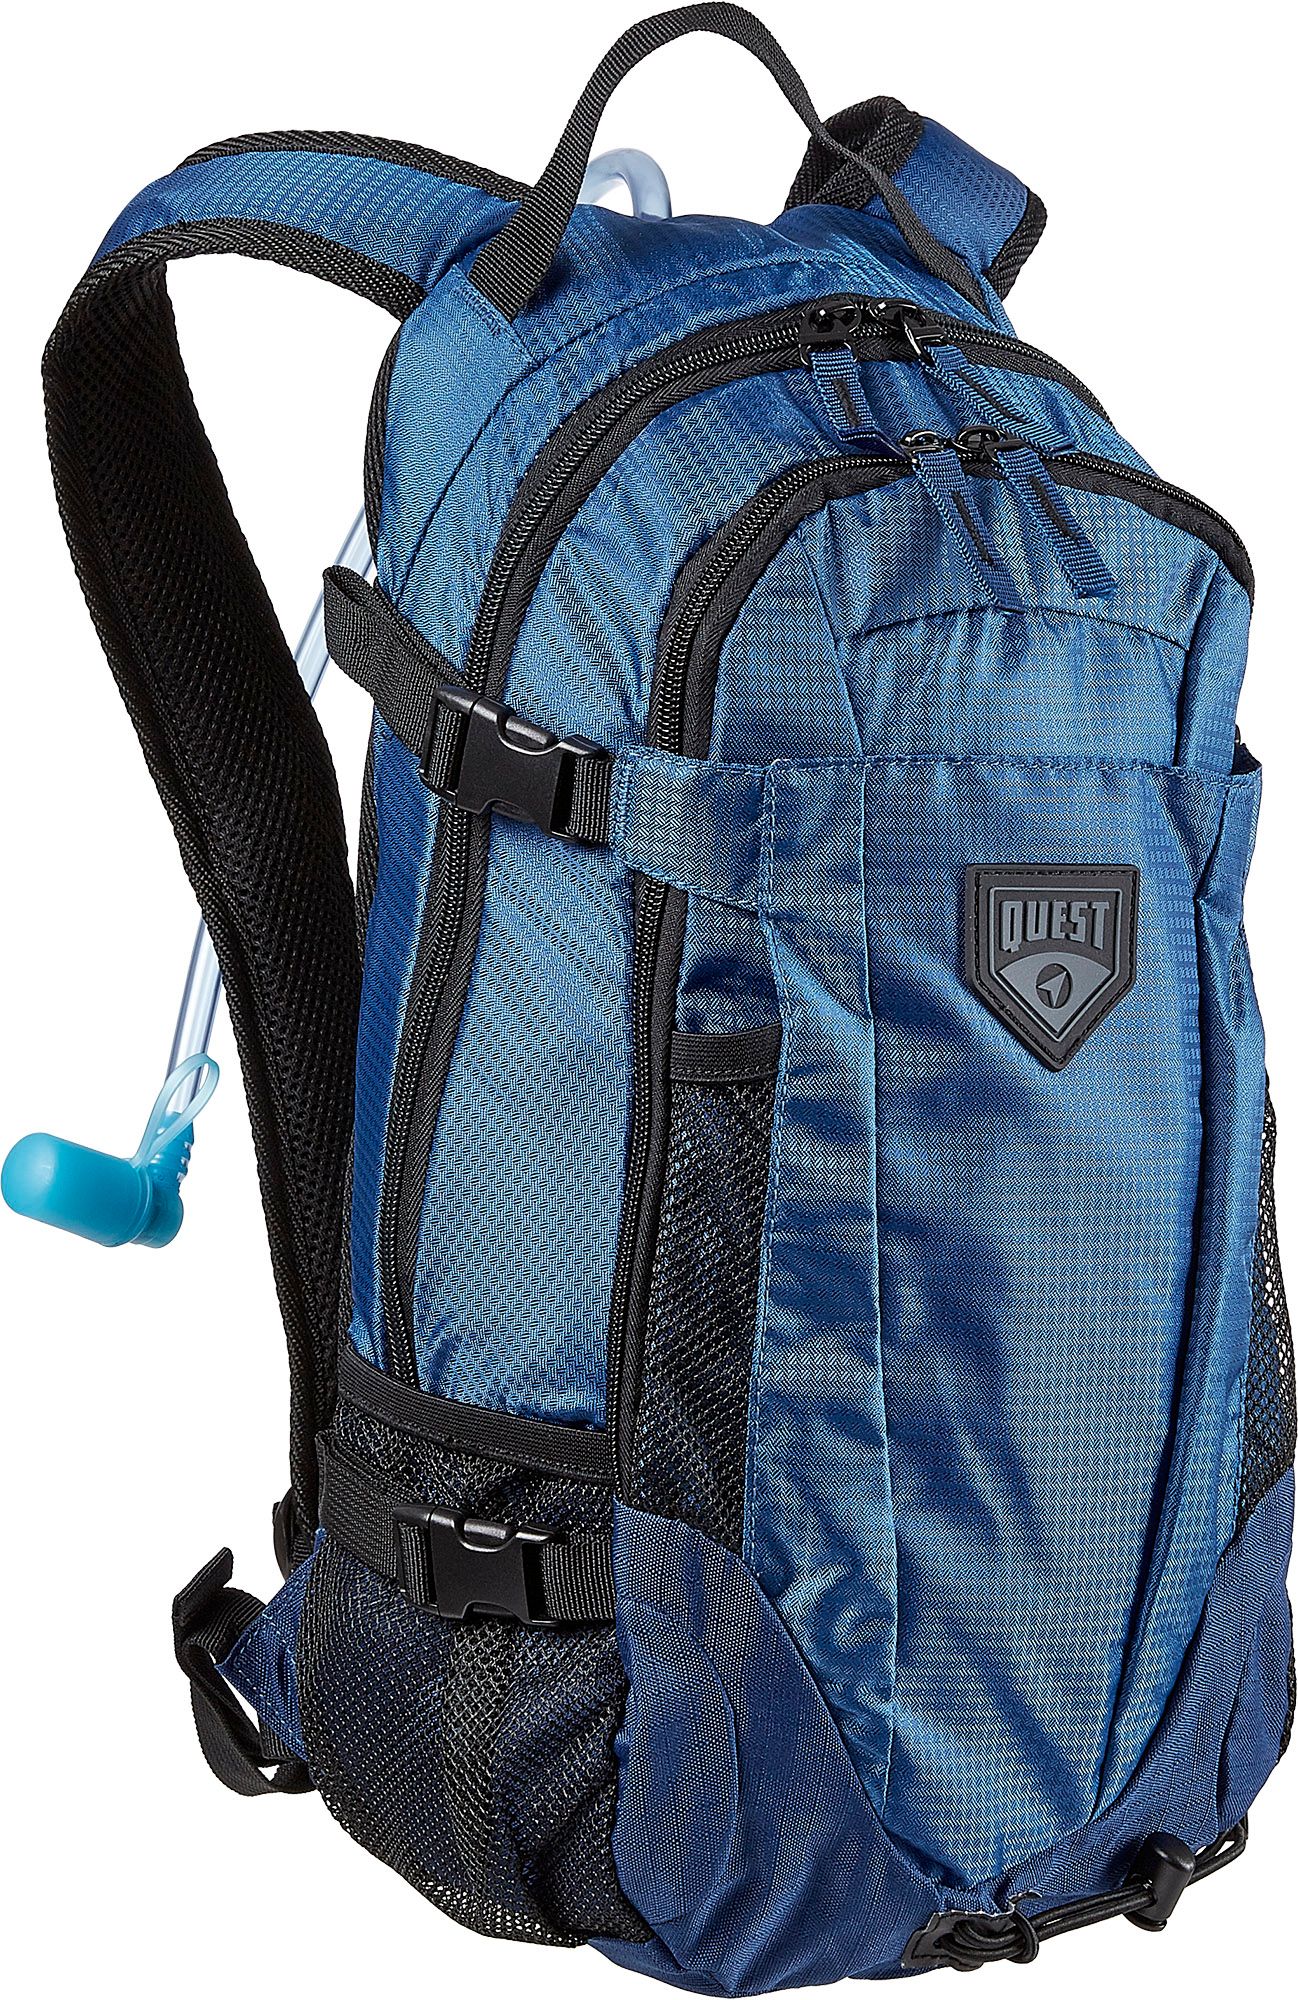 quest hiking backpack